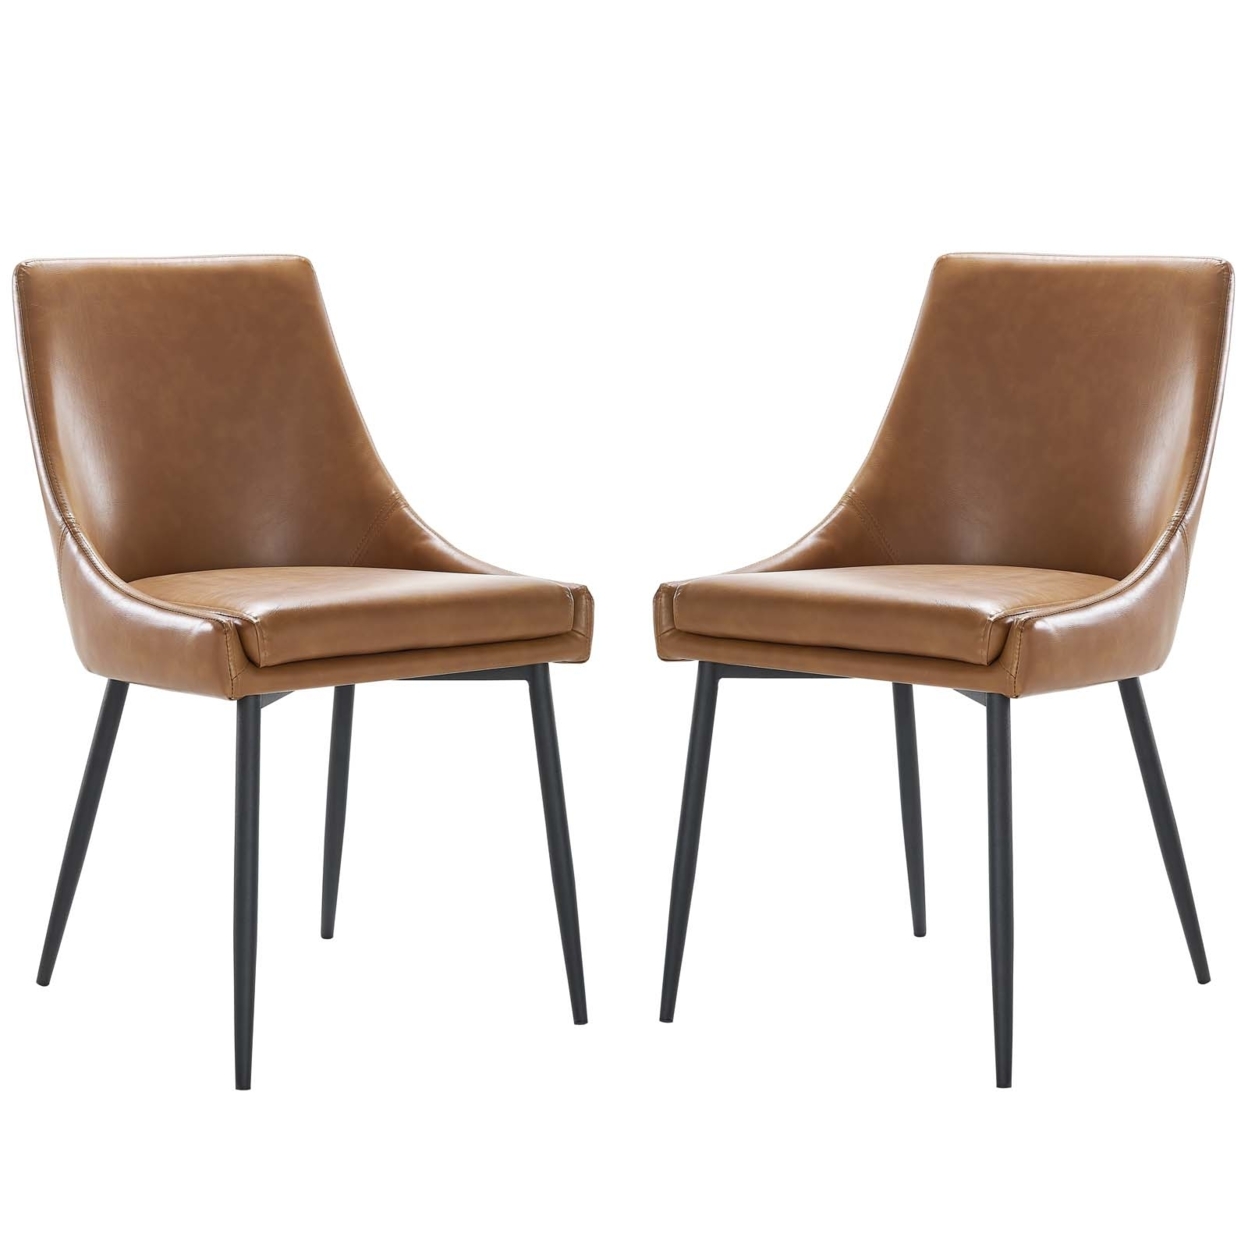 Viscount Vegan Leather Dining Chairs - Set Of 2, Black Tan